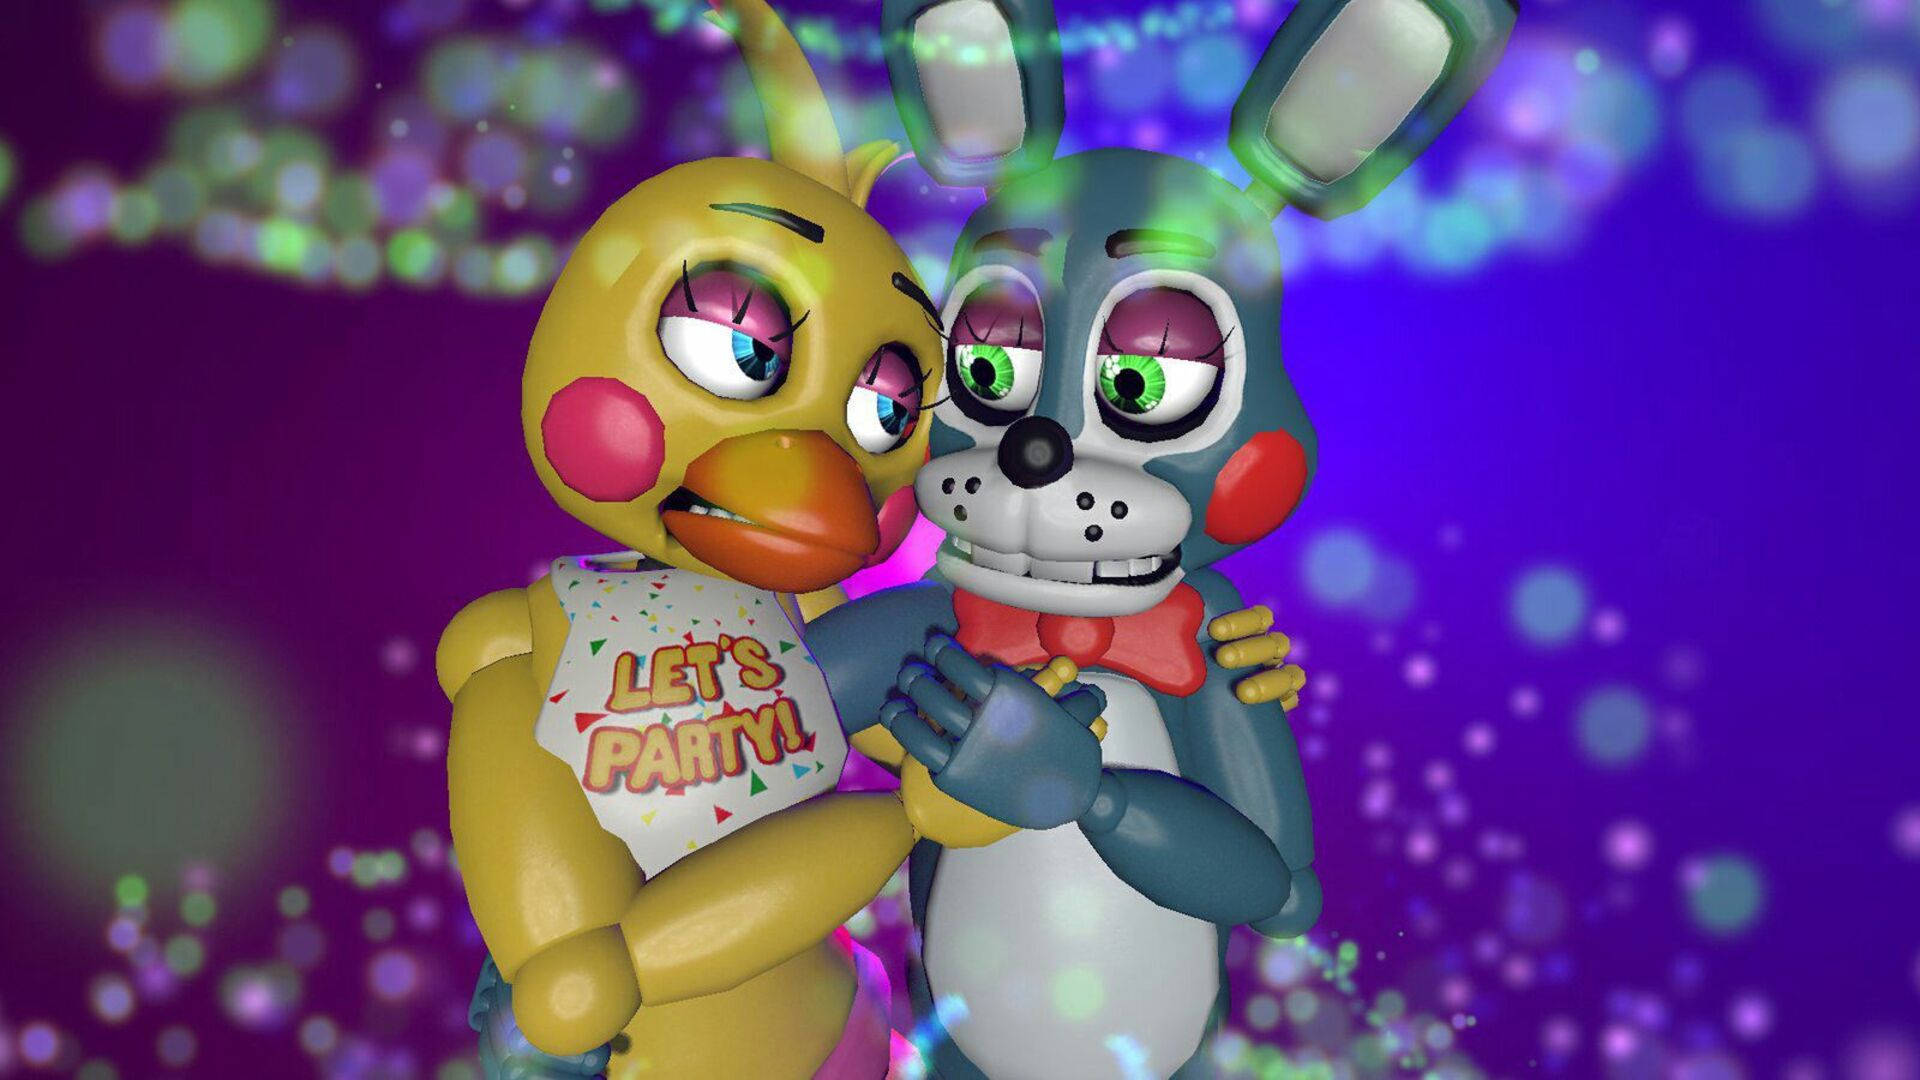 Download Fnaf Chica And Bonnie Couple Wallpaper